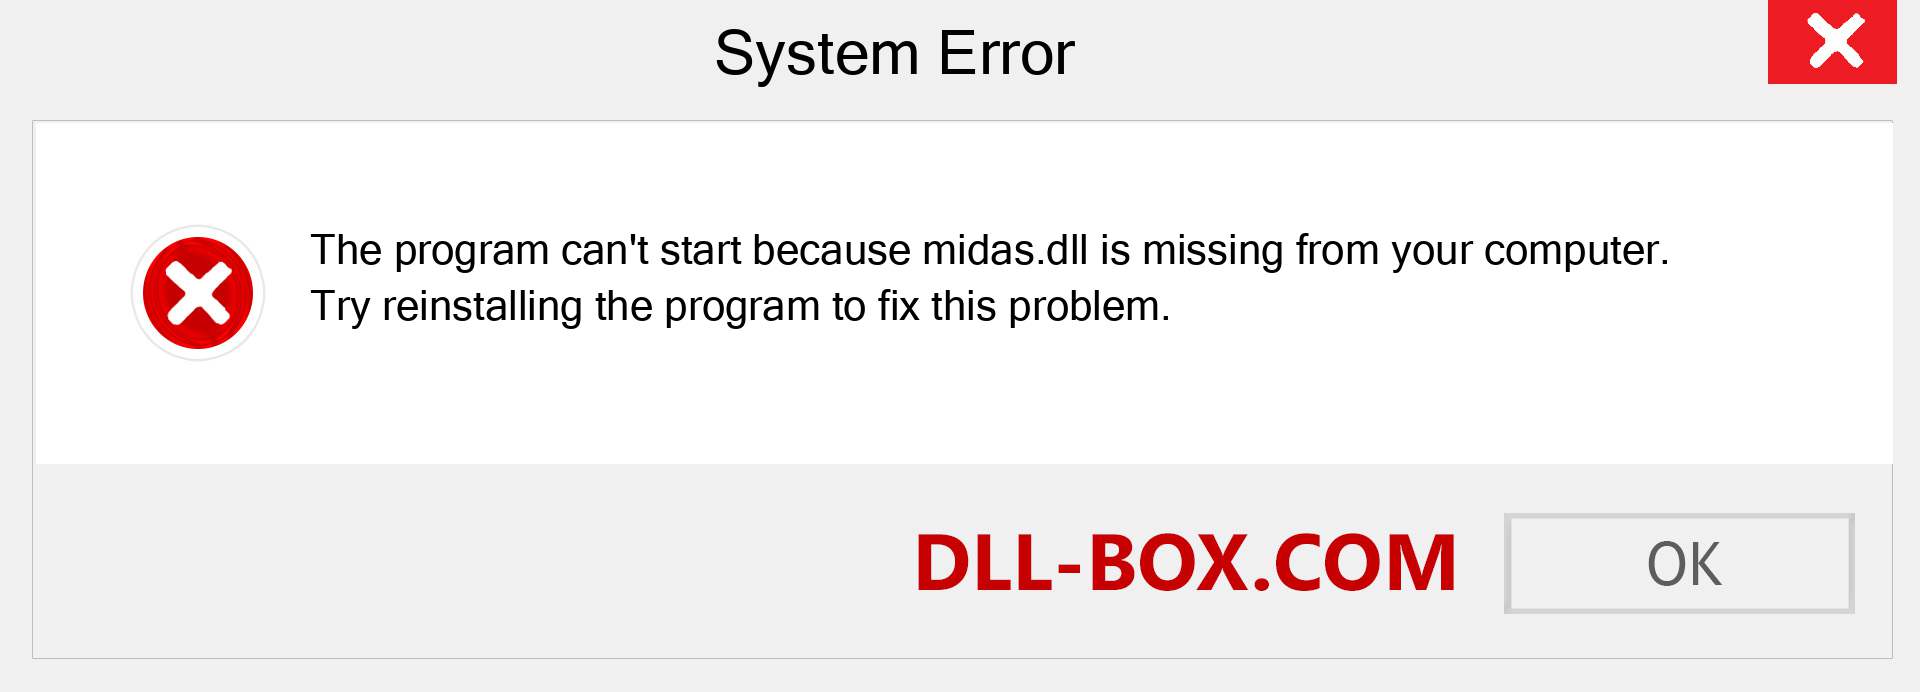  midas.dll file is missing?. Download for Windows 7, 8, 10 - Fix  midas dll Missing Error on Windows, photos, images